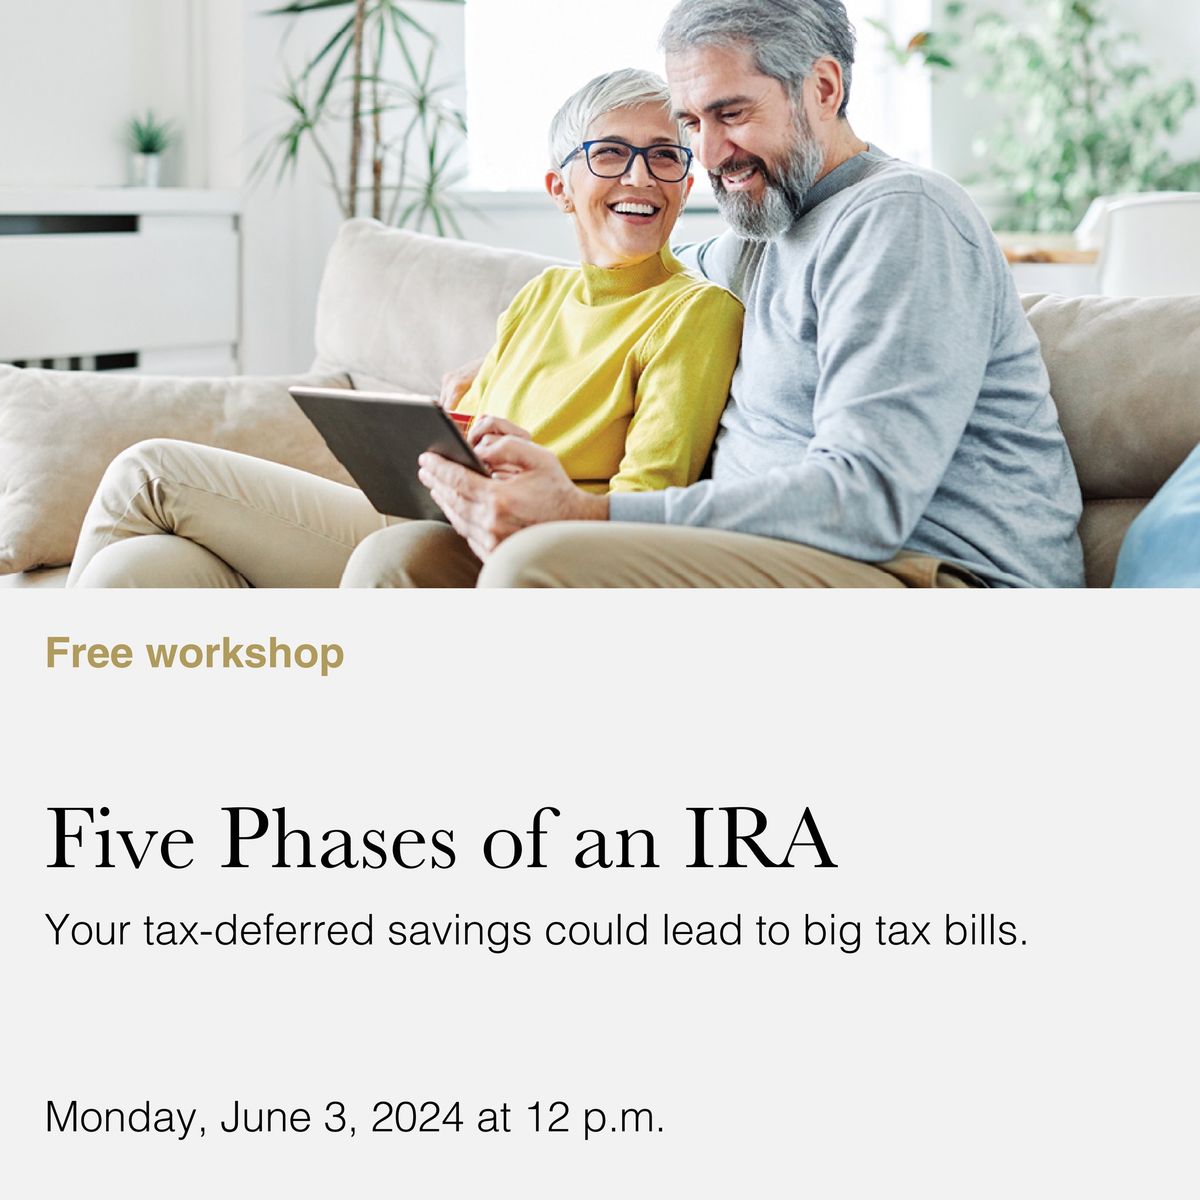 The 5 Stages of an IRA